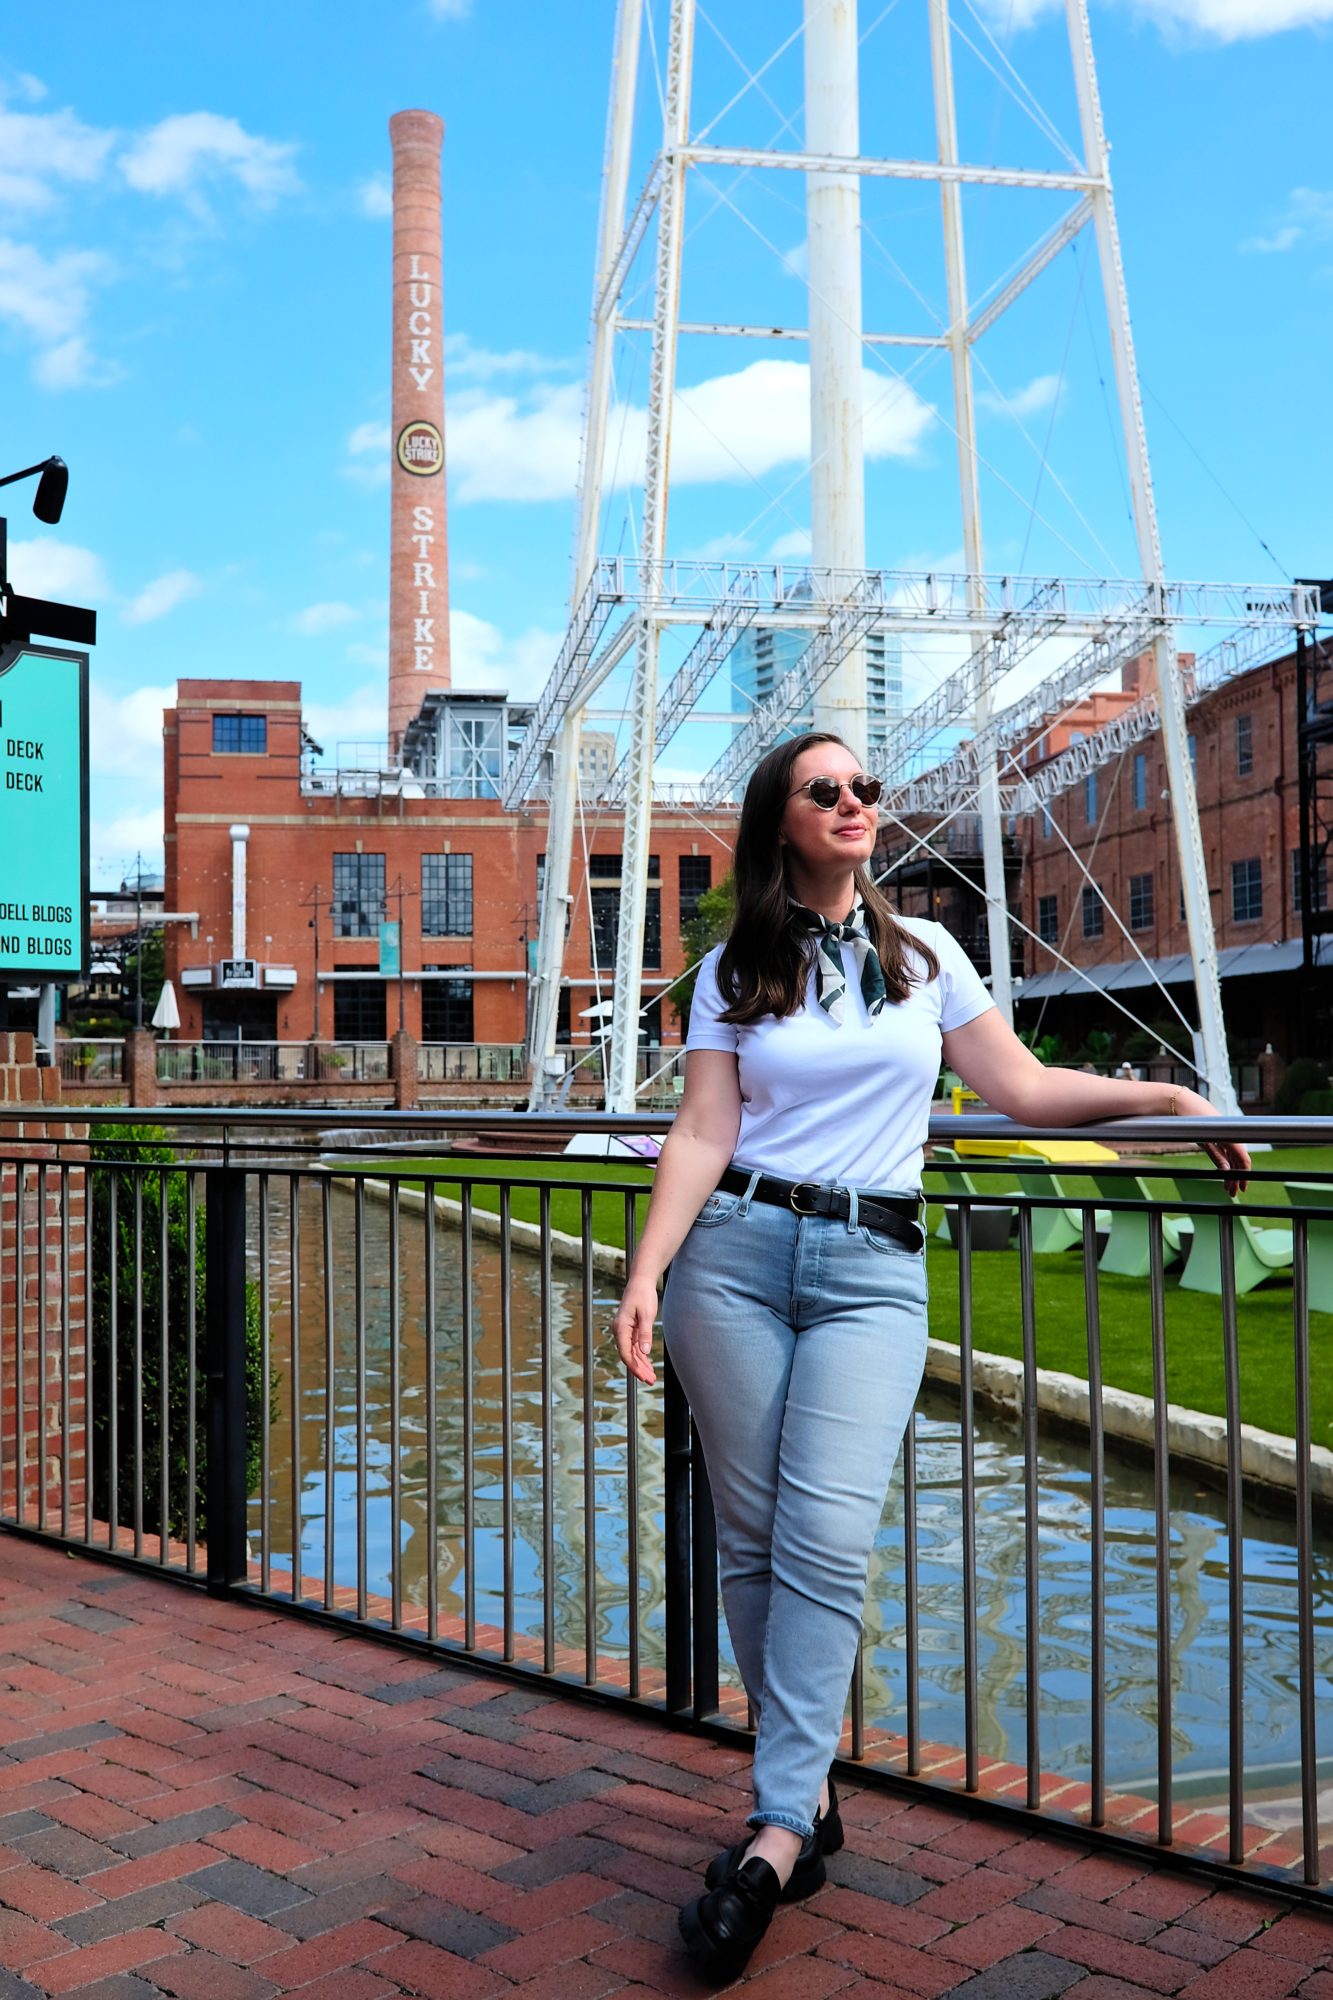 Alyssa wears a white tee and jeans at the American Tobacco Campus